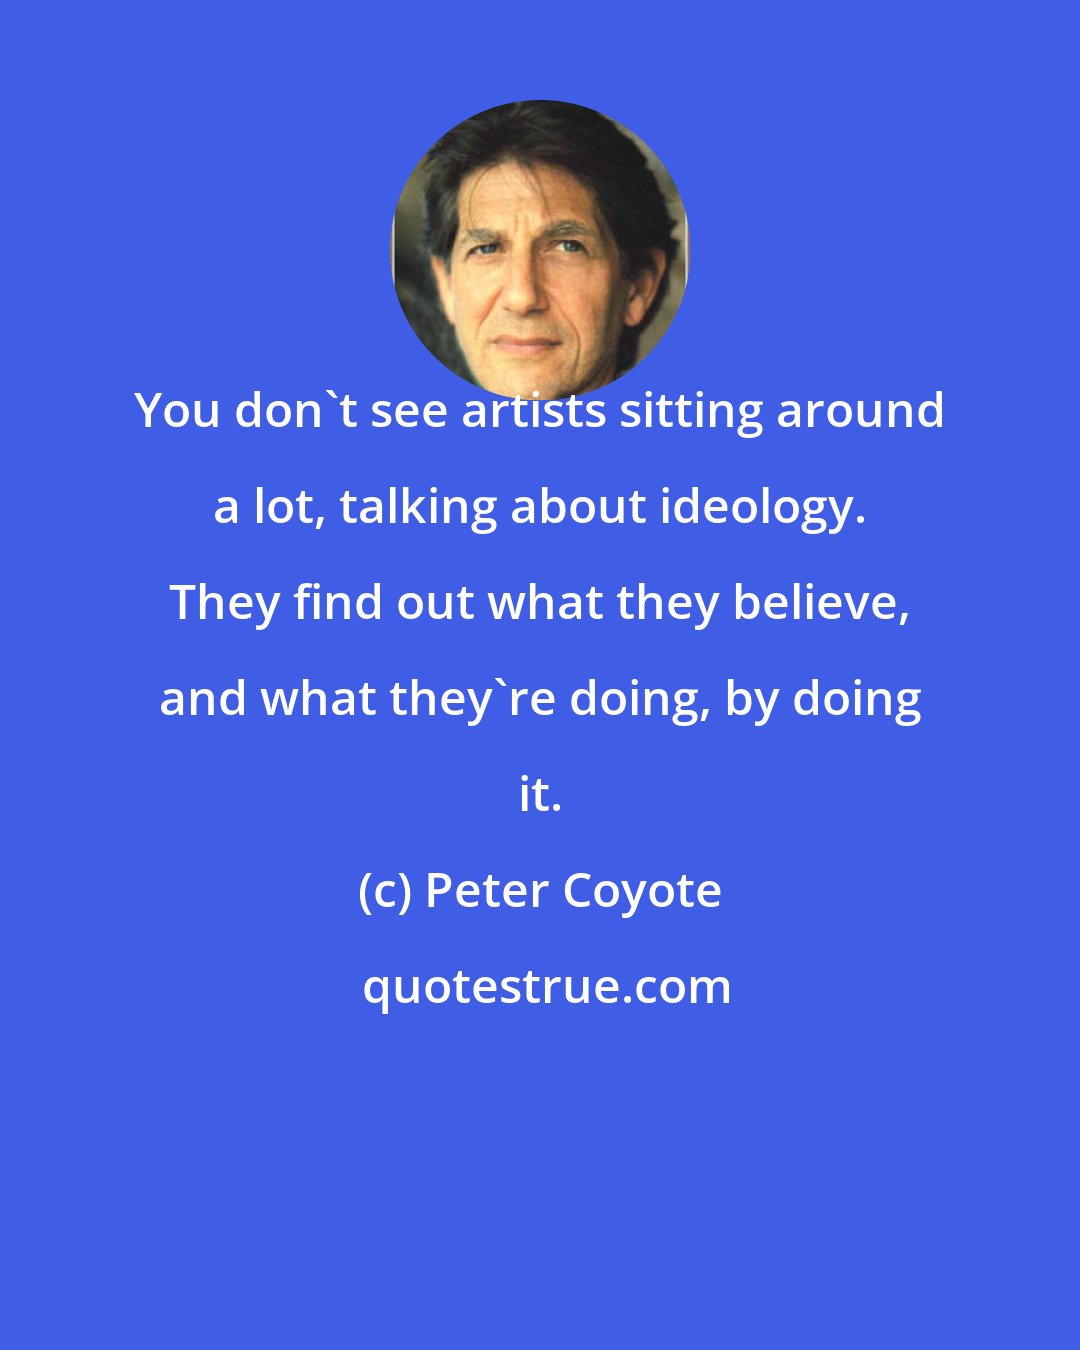 Peter Coyote: You don't see artists sitting around a lot, talking about ideology. They find out what they believe, and what they're doing, by doing it.